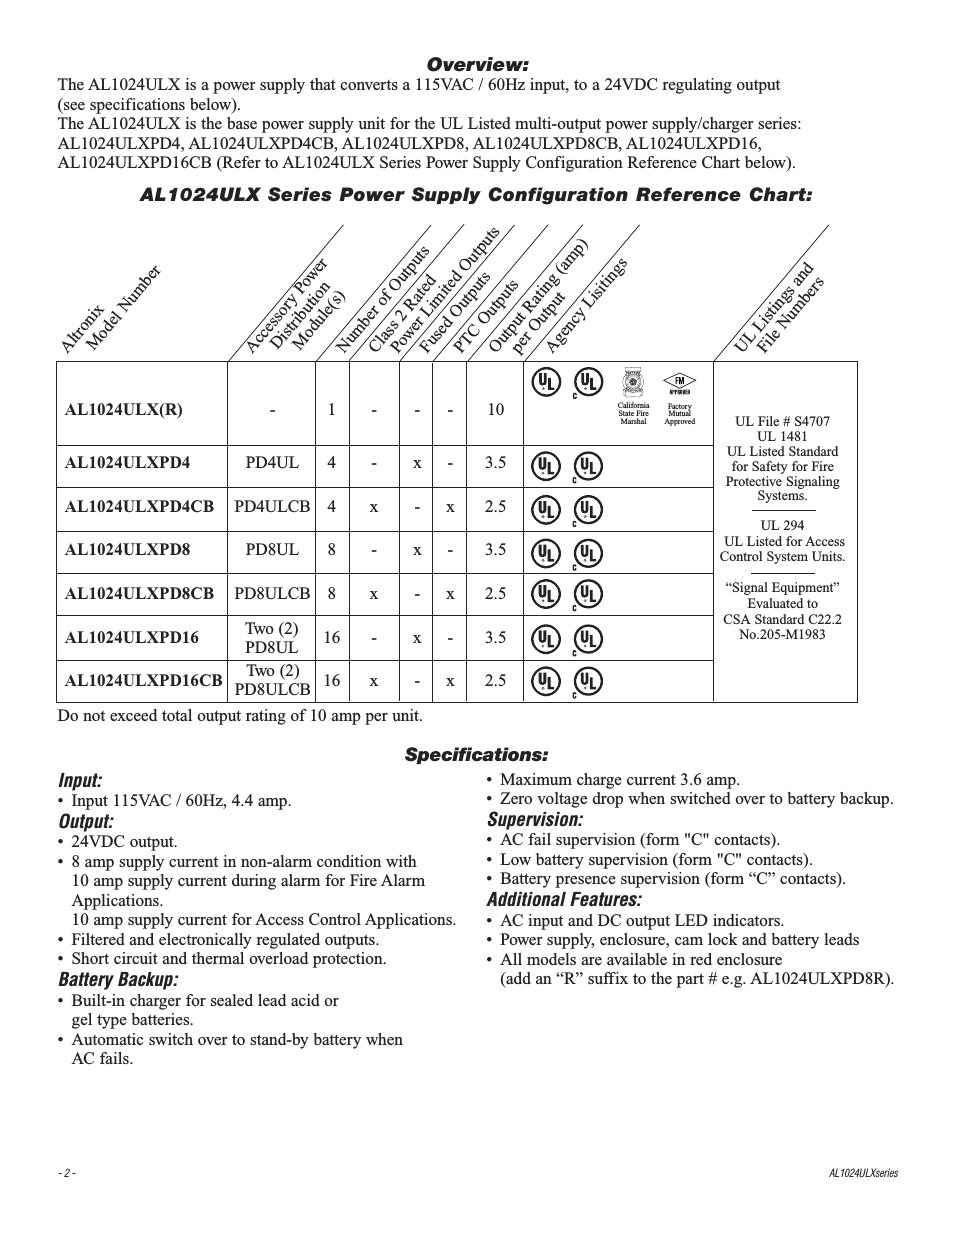 altronix al1024ulxpd8r installation instructions user manual page 2 8